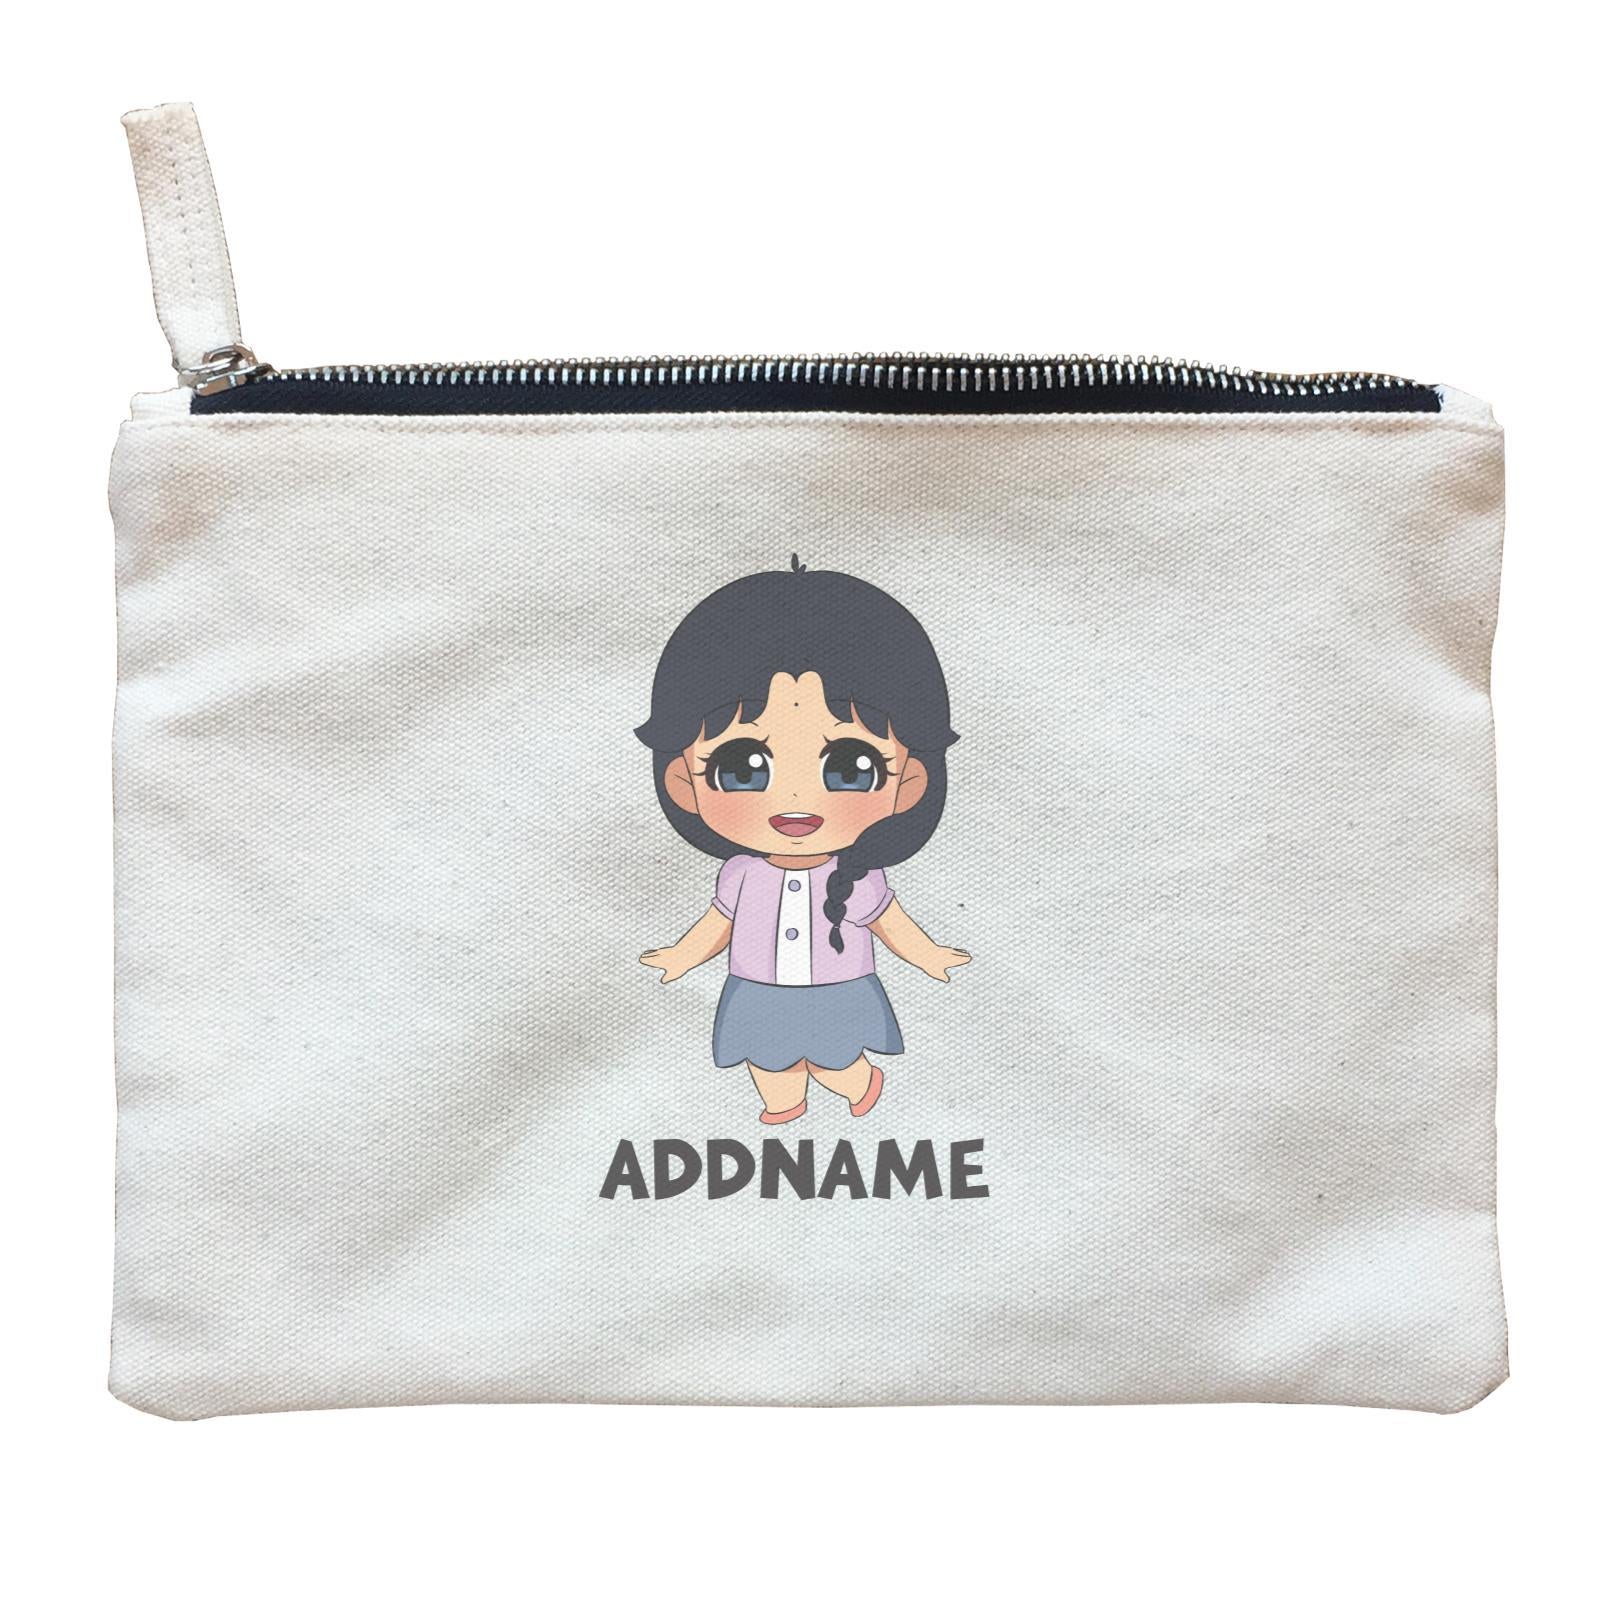 Children's Day Gift Series Little Indian Girl Addname  Zipper Pouch